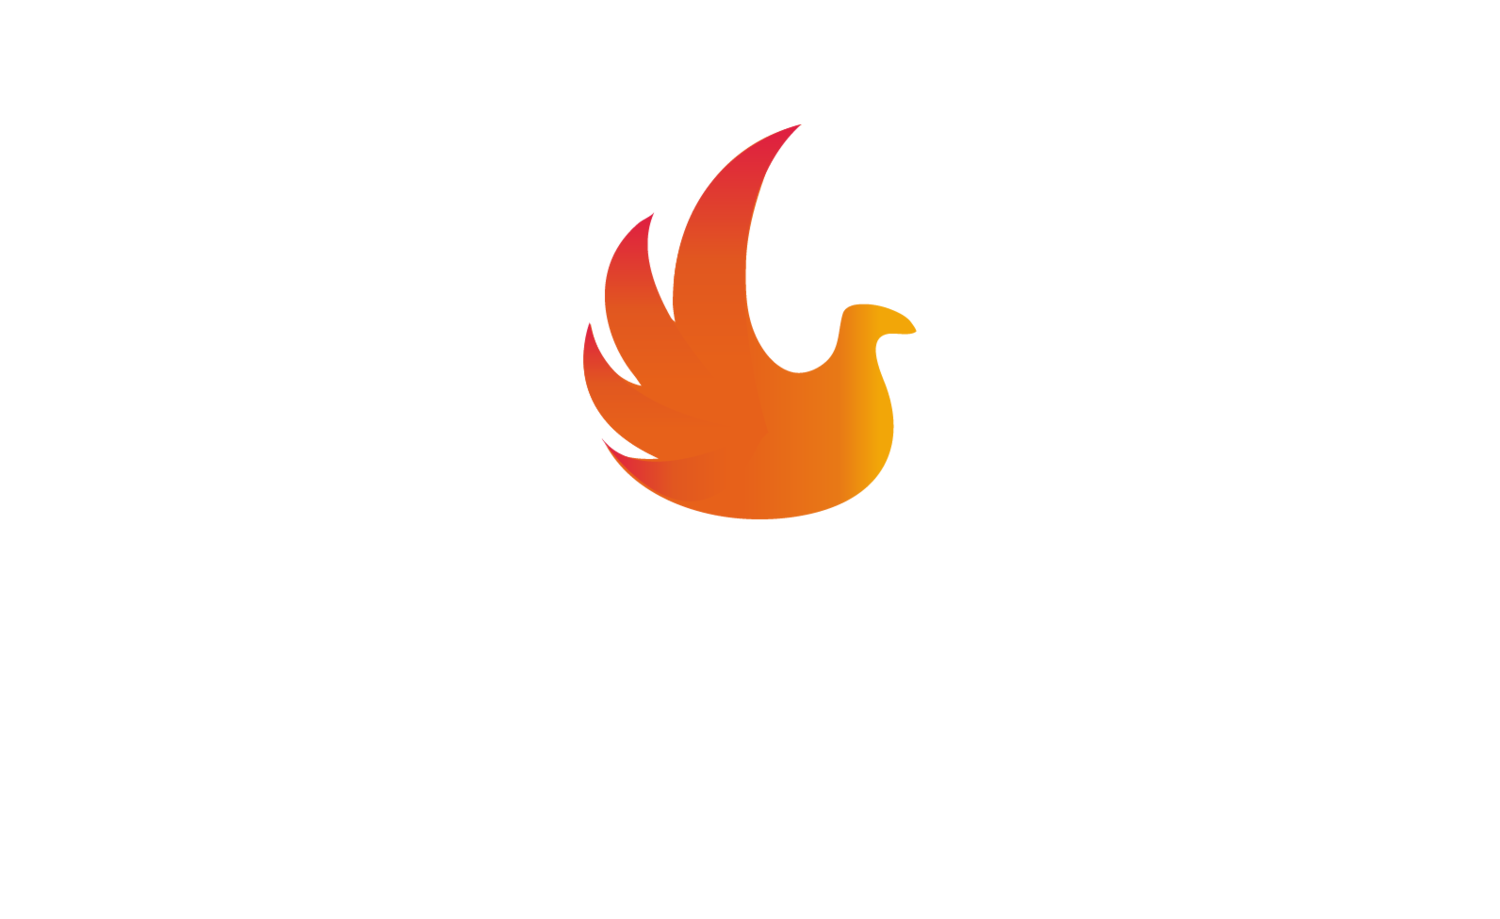 Severn Valley Fire Protection Ltd